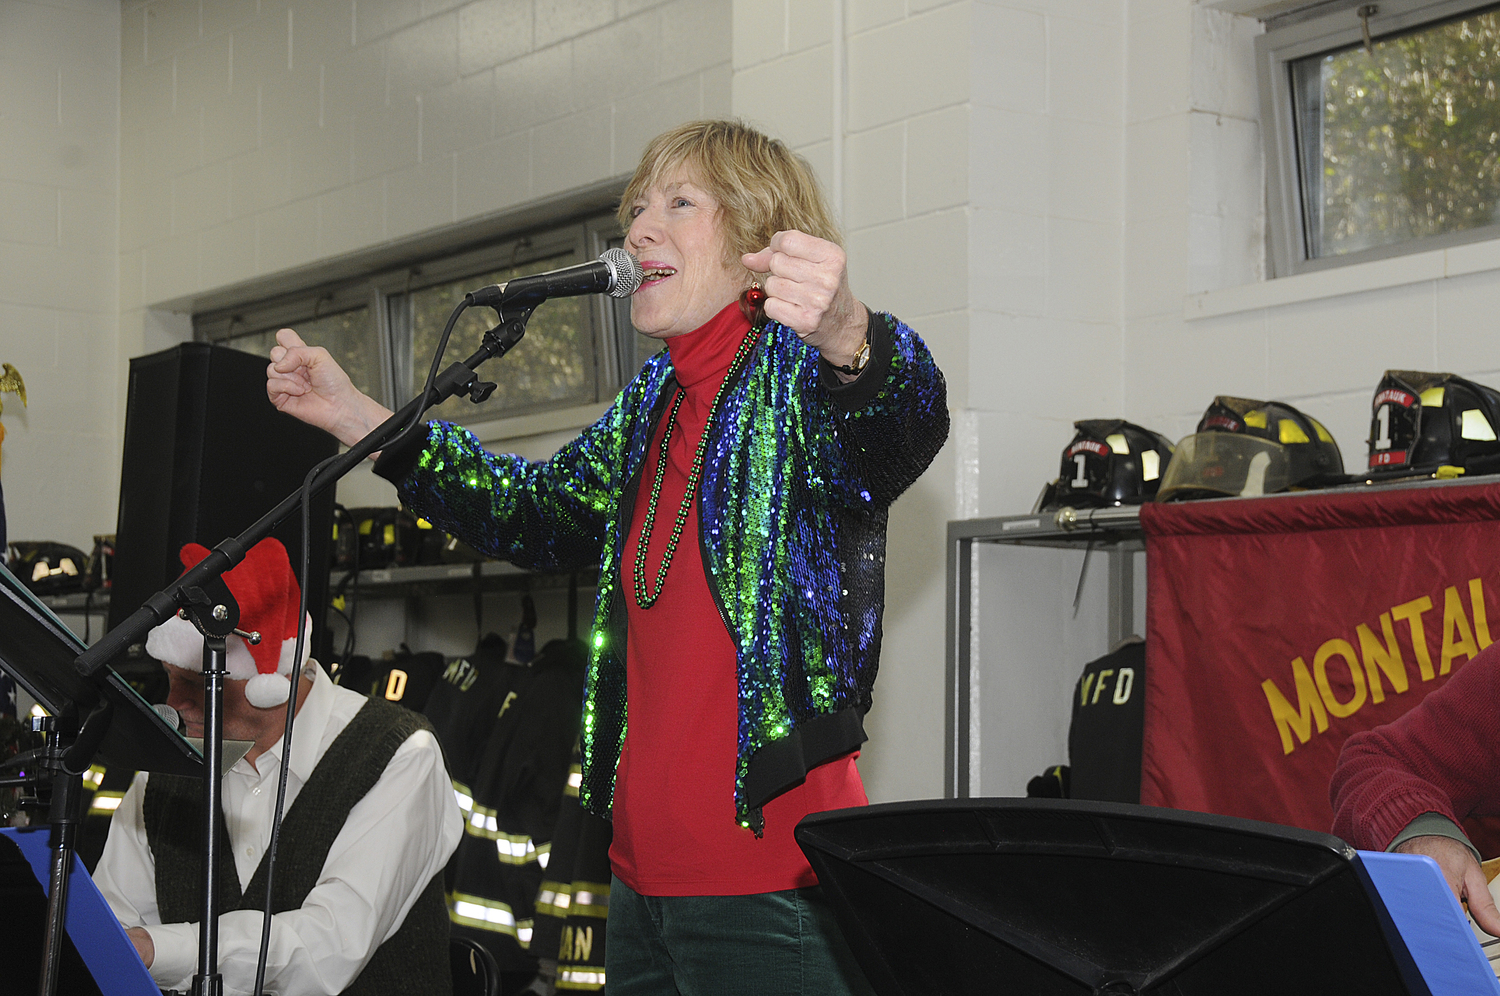 Sarah Conway performs at the Montauk Fire Department's Senior Holiday Party last year.  RICHARD LEWIN